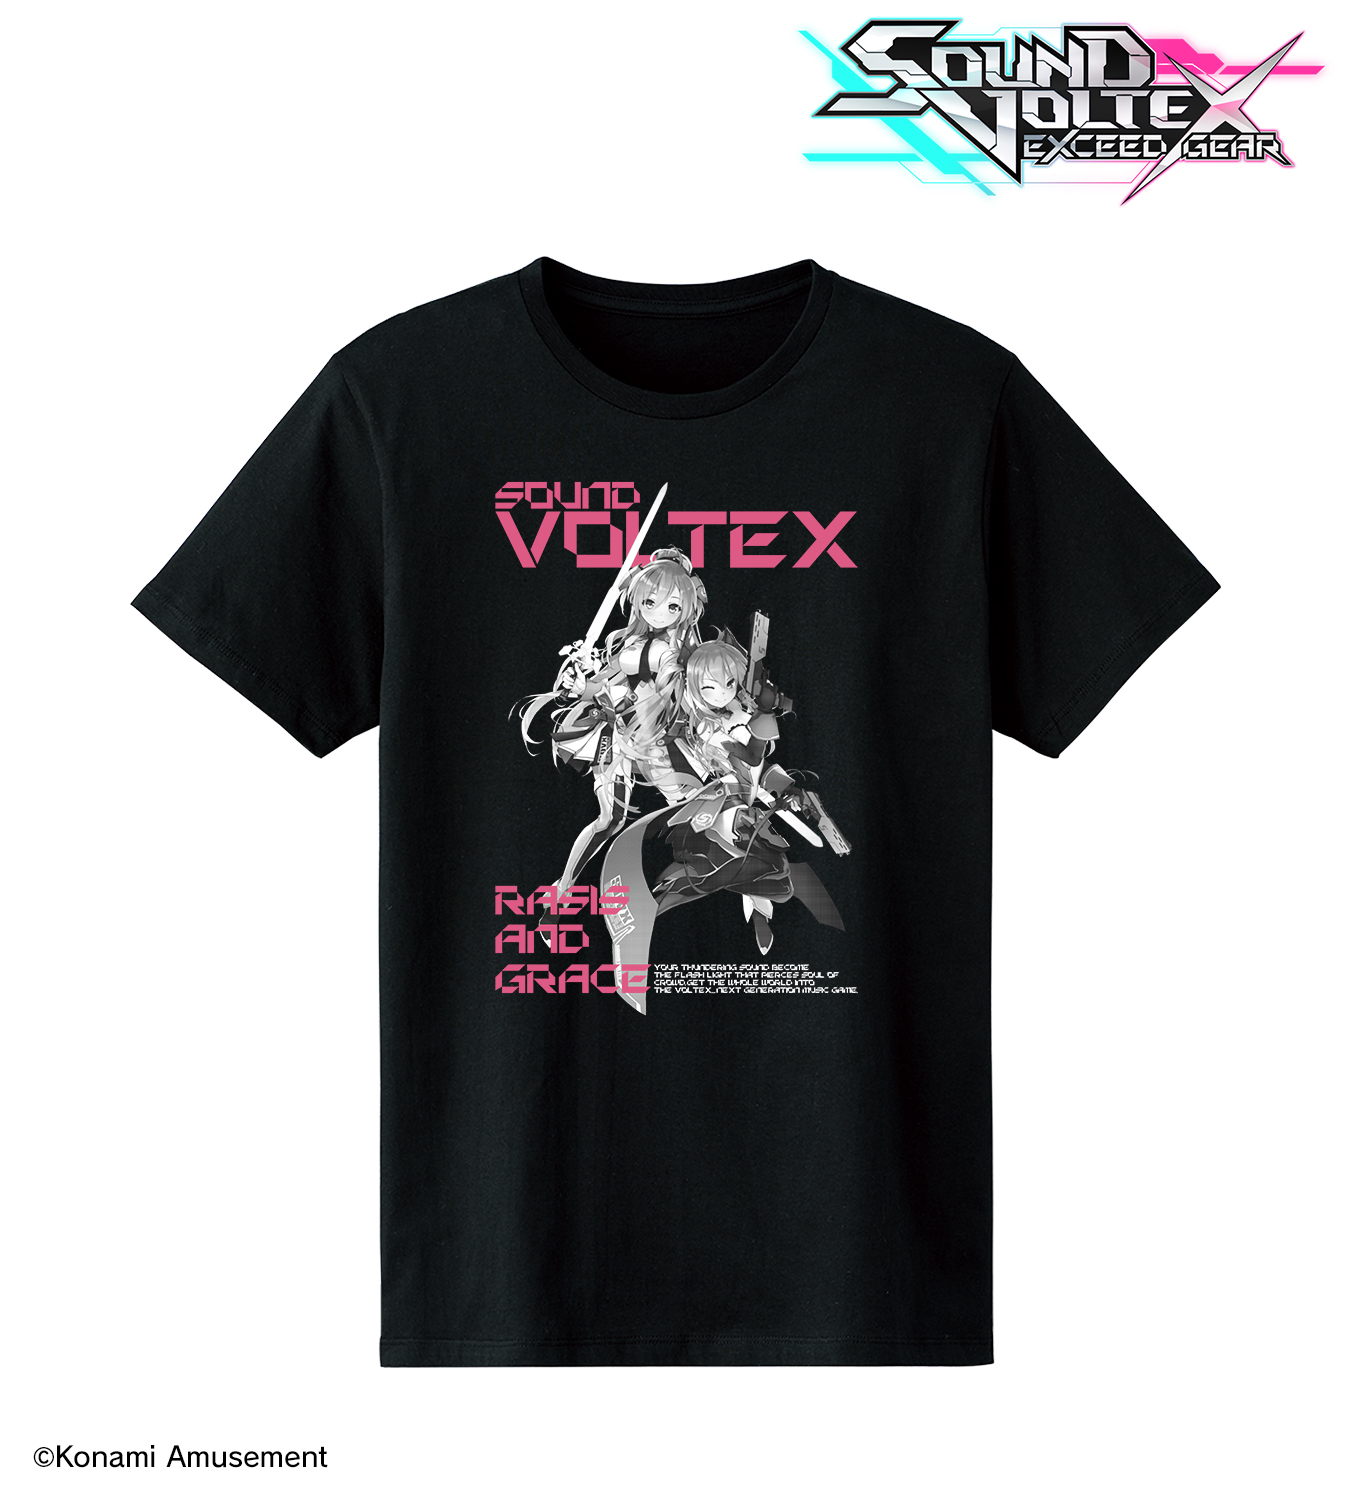 SOUND VOLTEX EXCEED GEAR』のレイシス＆グレイス Tシャツ、ロゴ